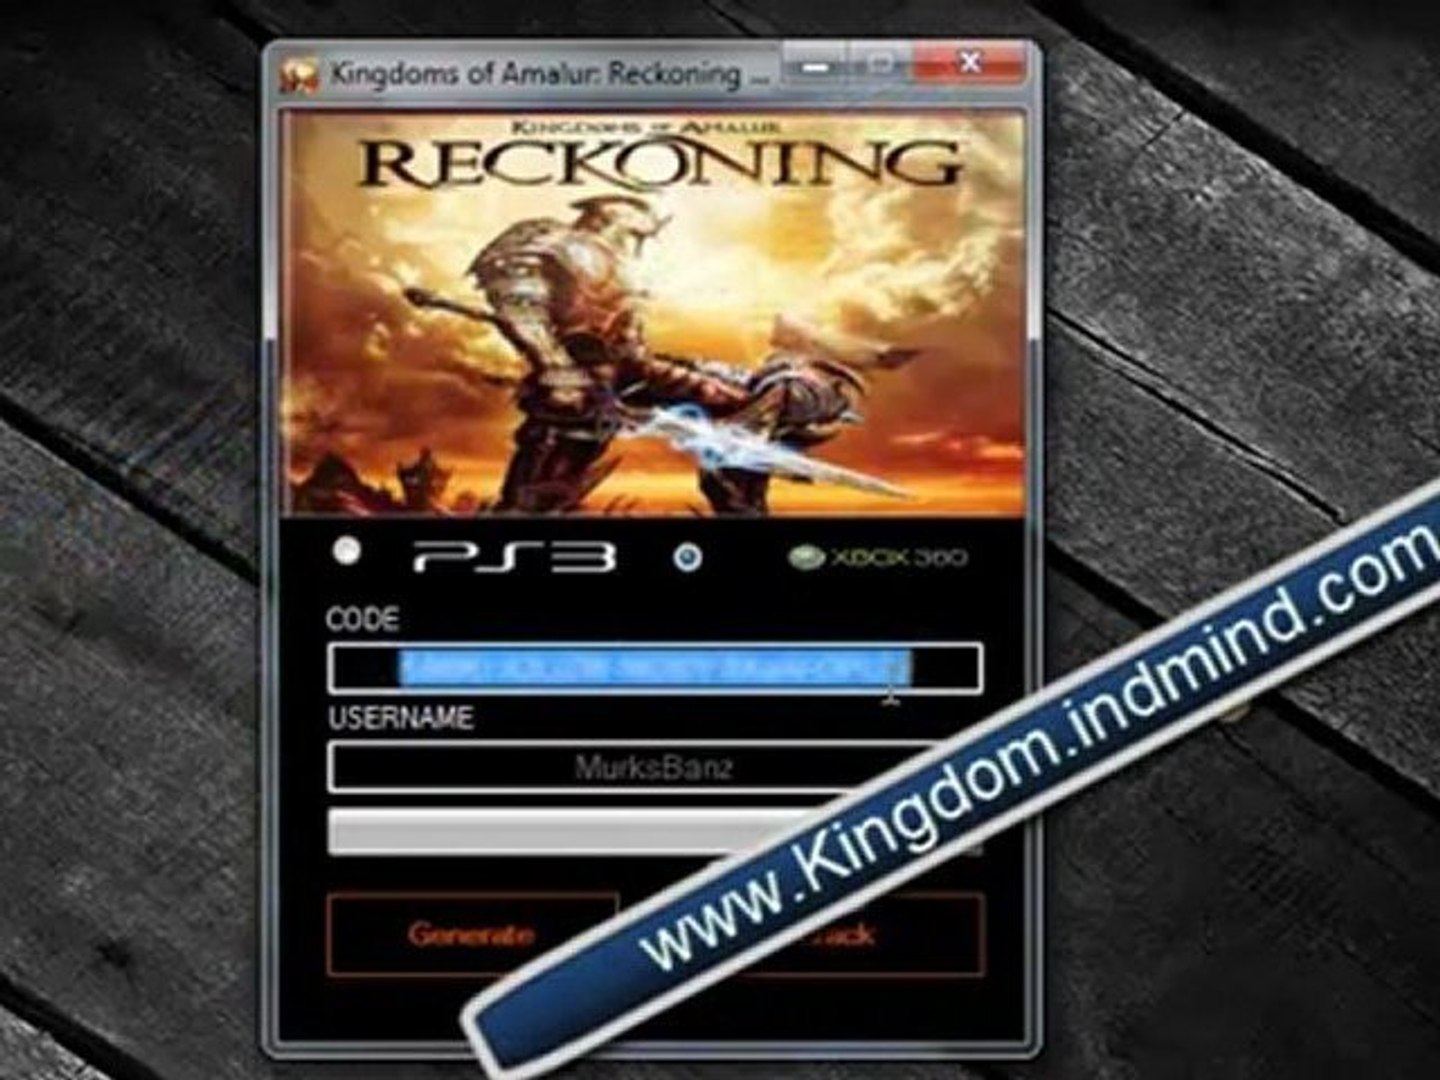 Download Kingdoms of Amalur Reckoning cheats For free - video Dailymotion